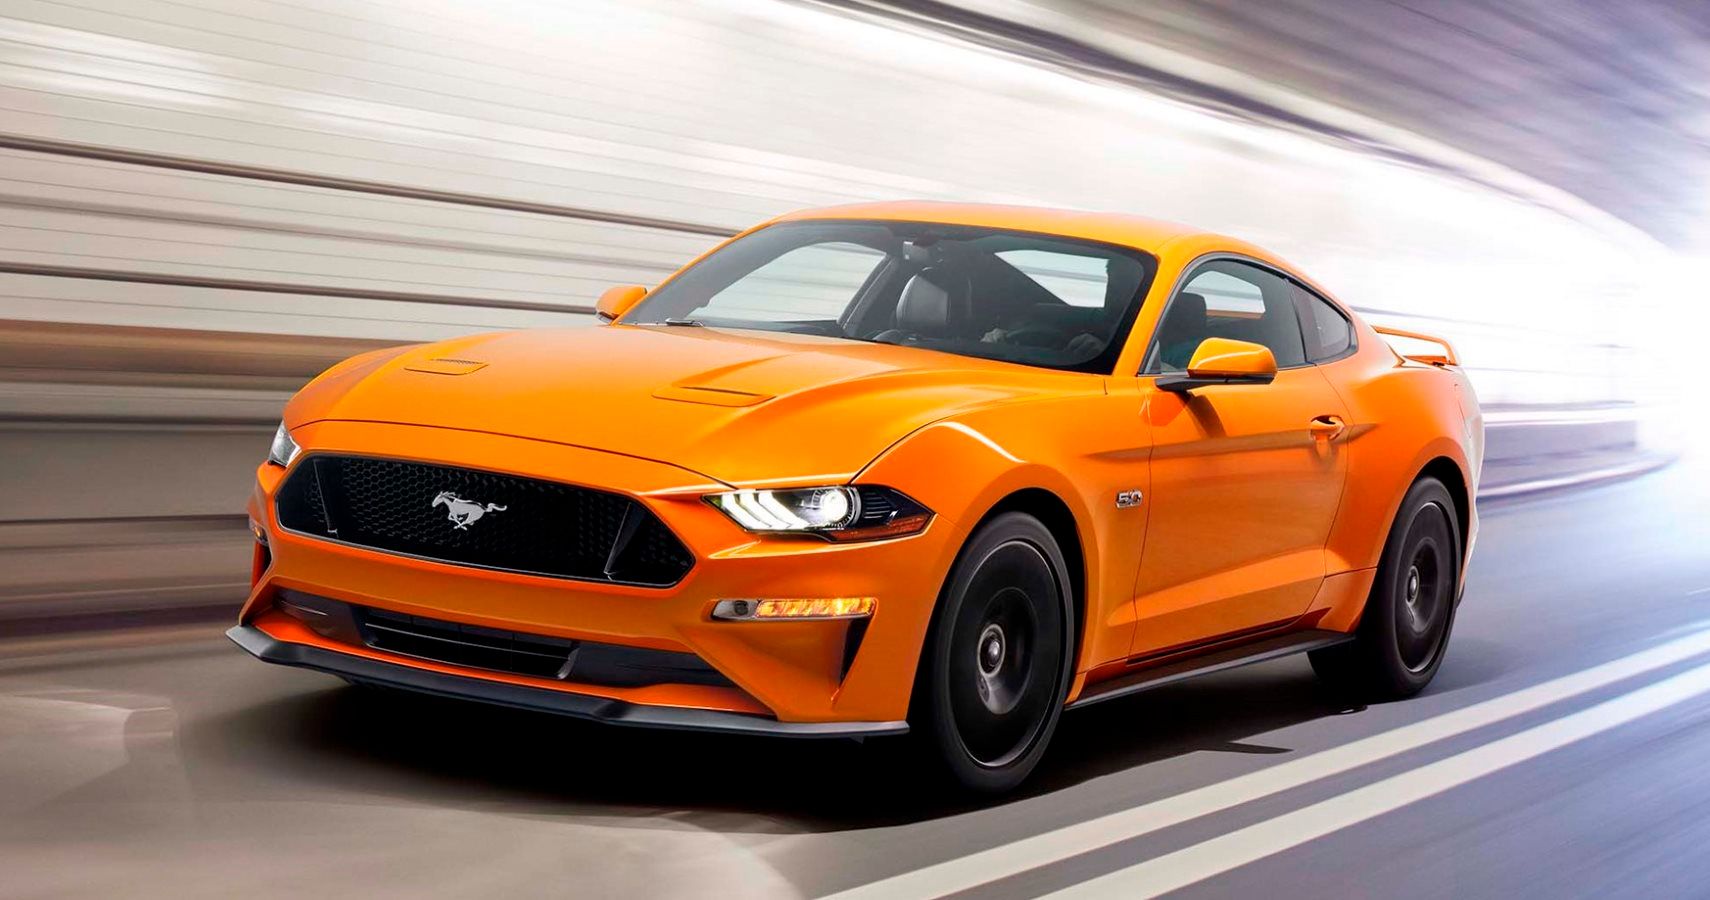 2018 Ford Mustang GT: Explaining How The Automatic Is A Lot Faster Than The Manual